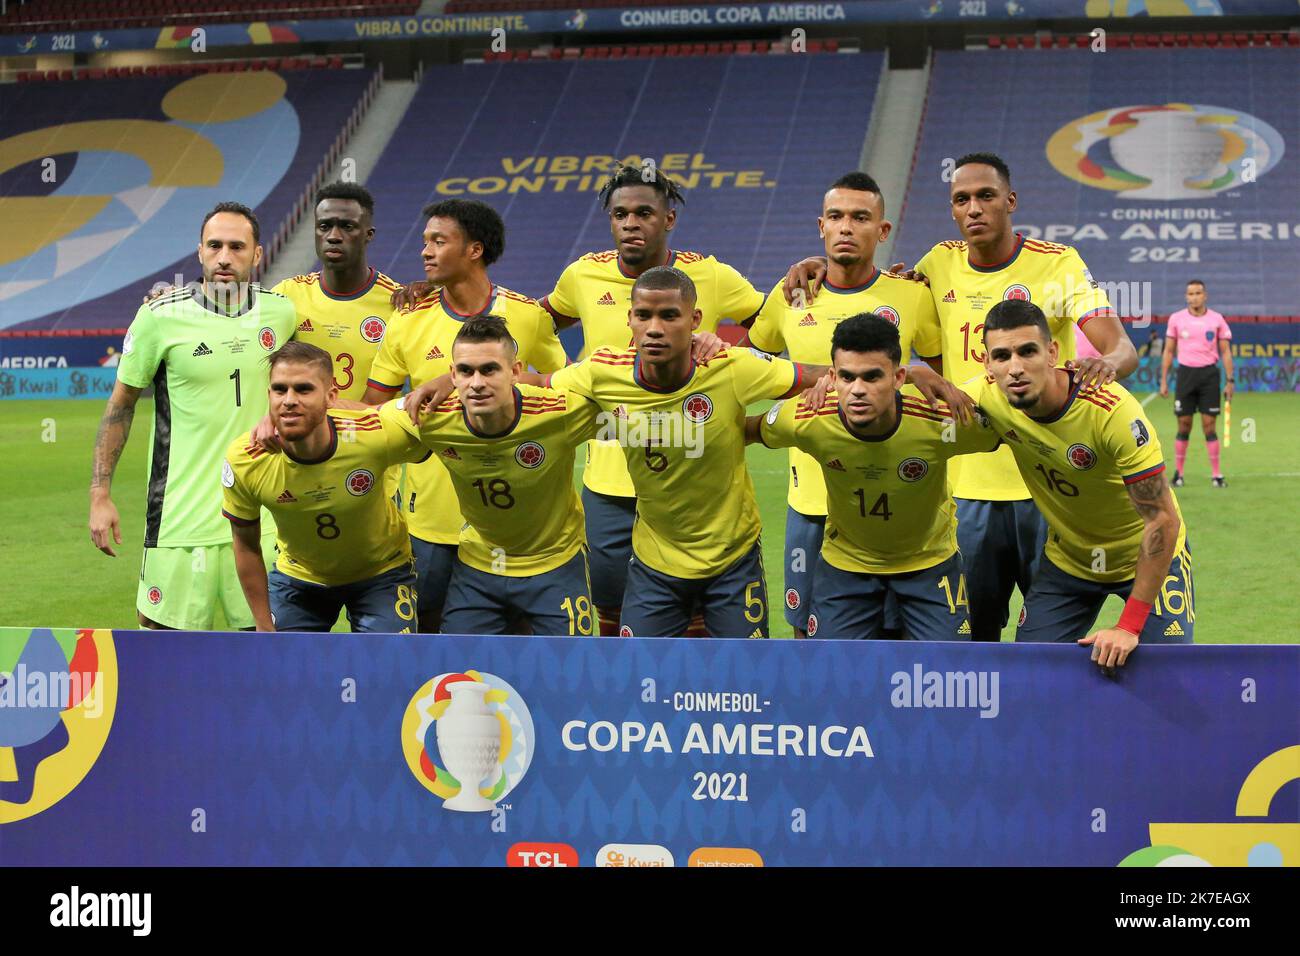 ©Laurent Lairys/MAXPPP - Team Colombia during the Copa America 2021, semi-final football match between Argentina and Colombia on July 6, 2021 at Estádio Nacional Mané Garrincha in Brasilia, Brazil photos Laurent Lairys /MAXPPP Stock Photo